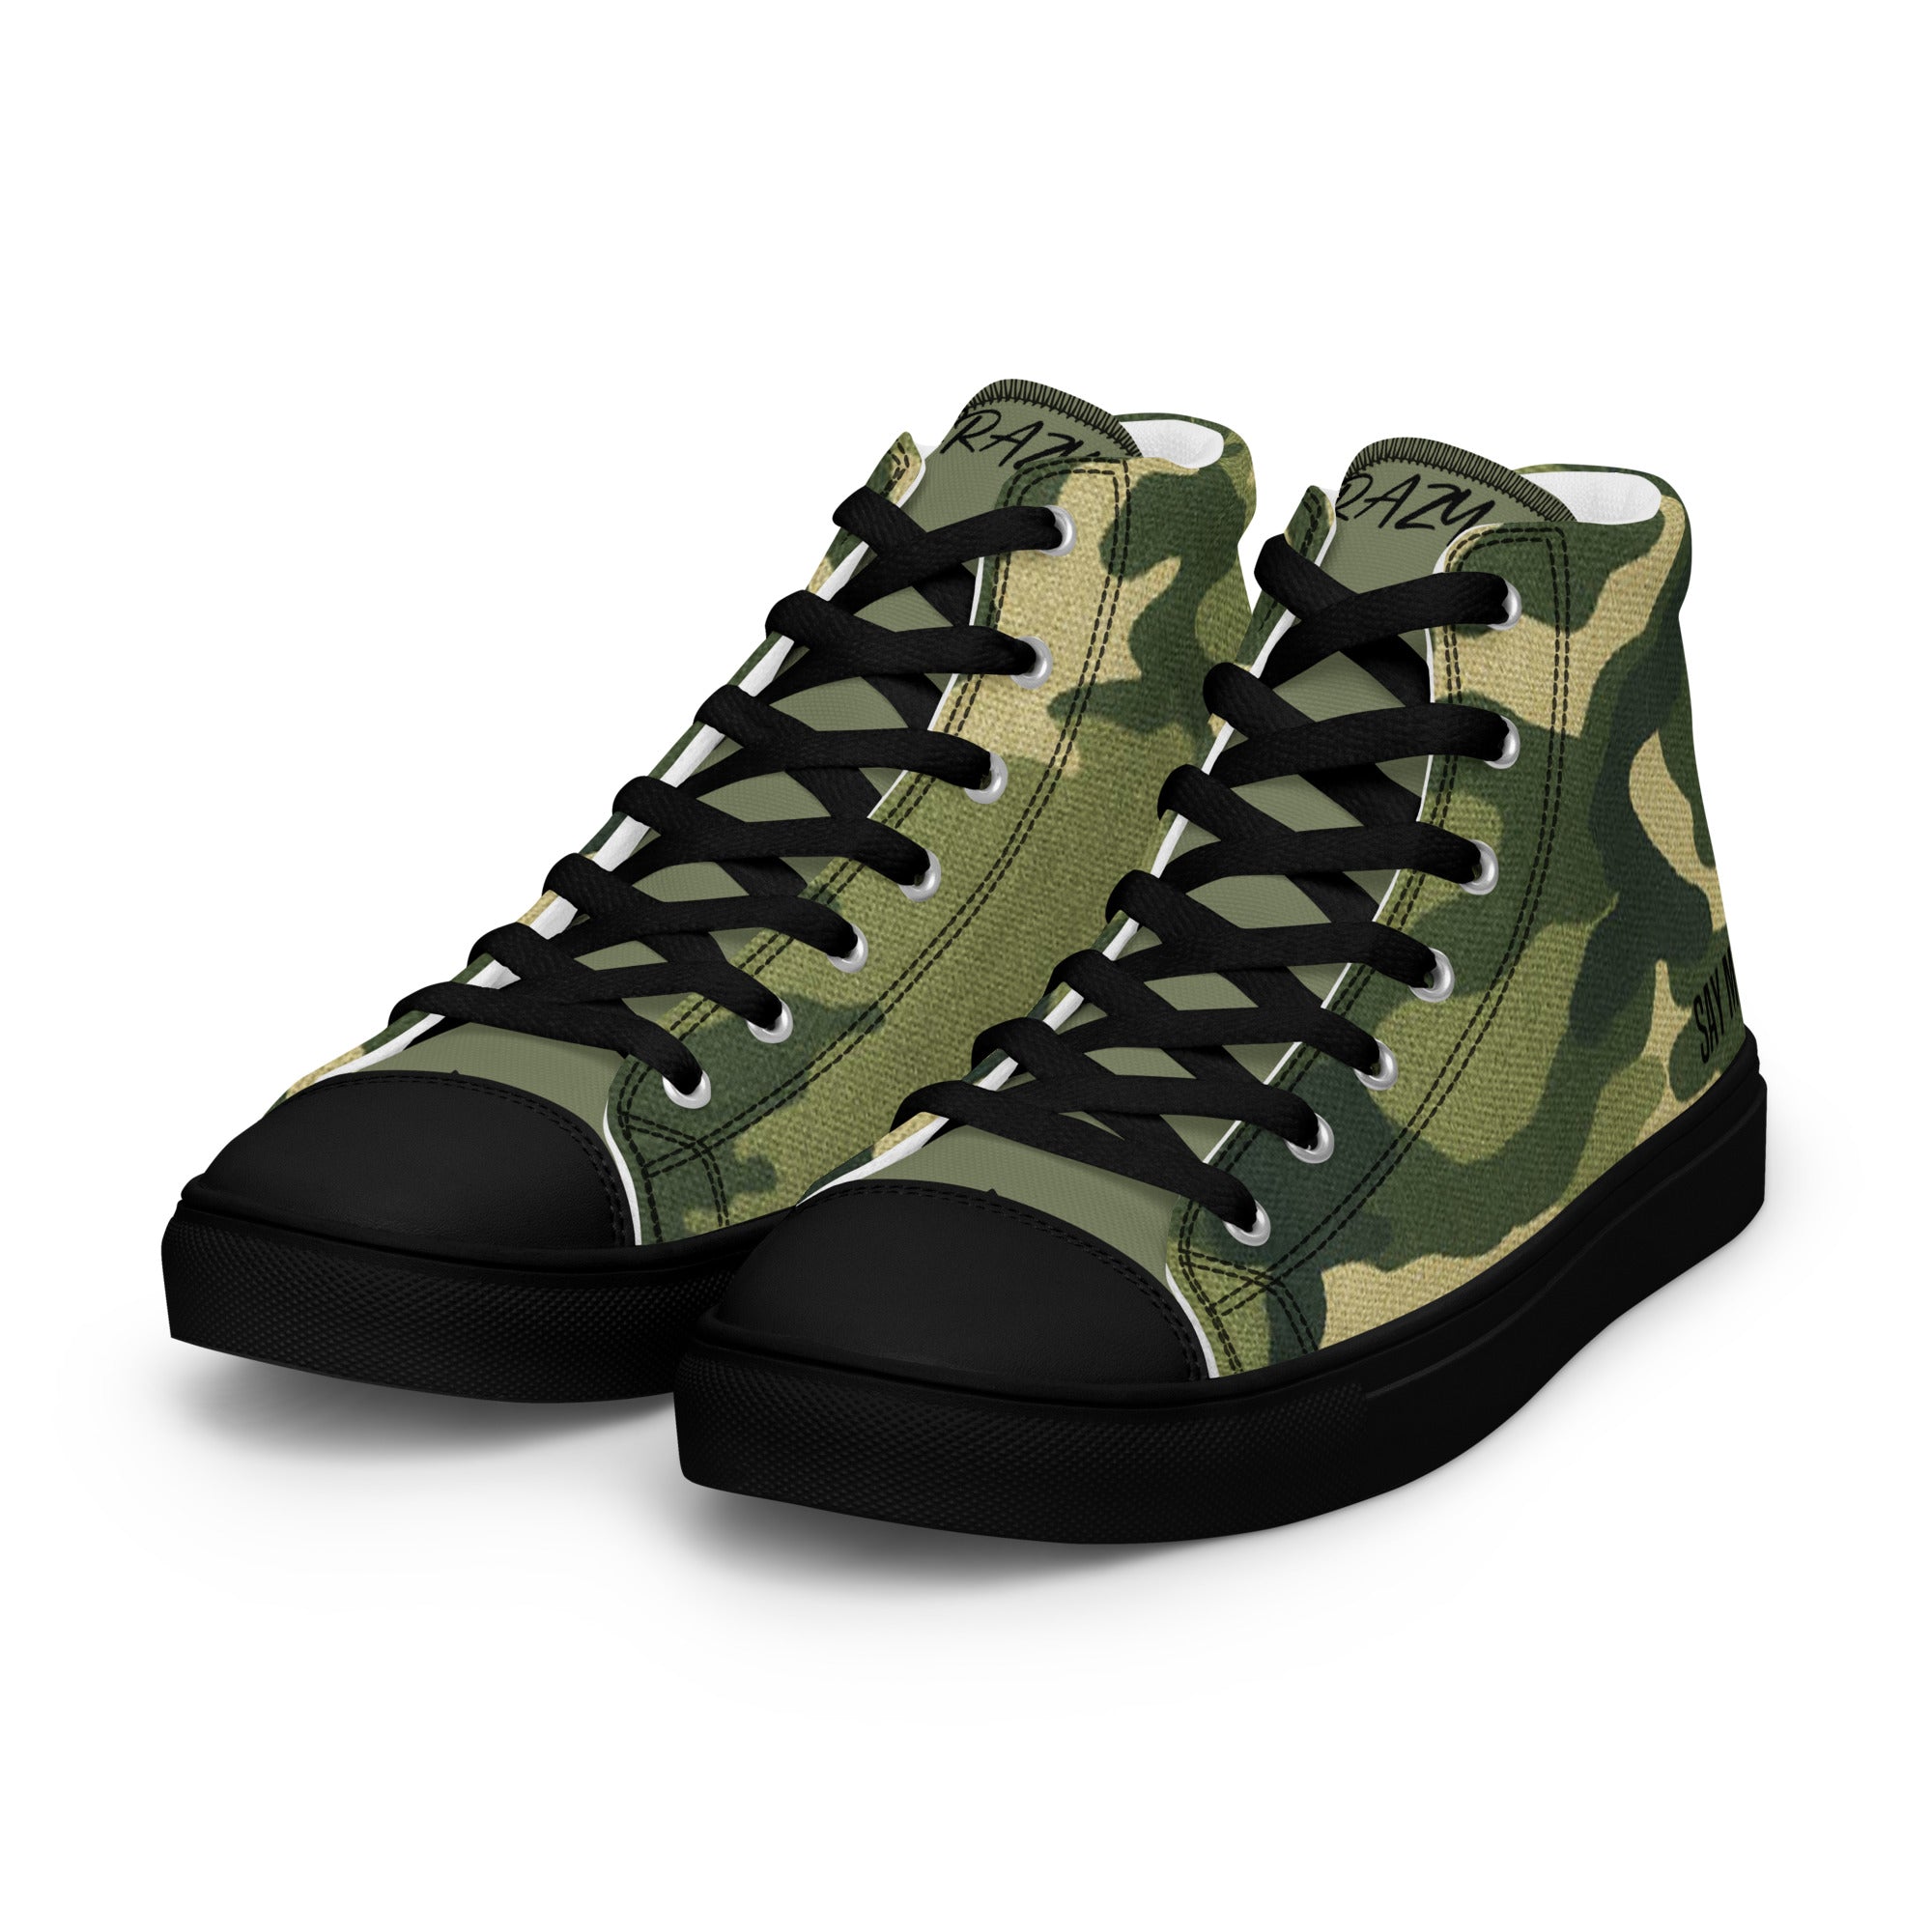 Baskets hautes camouflage vert en toile homme "SAY MY NAME"